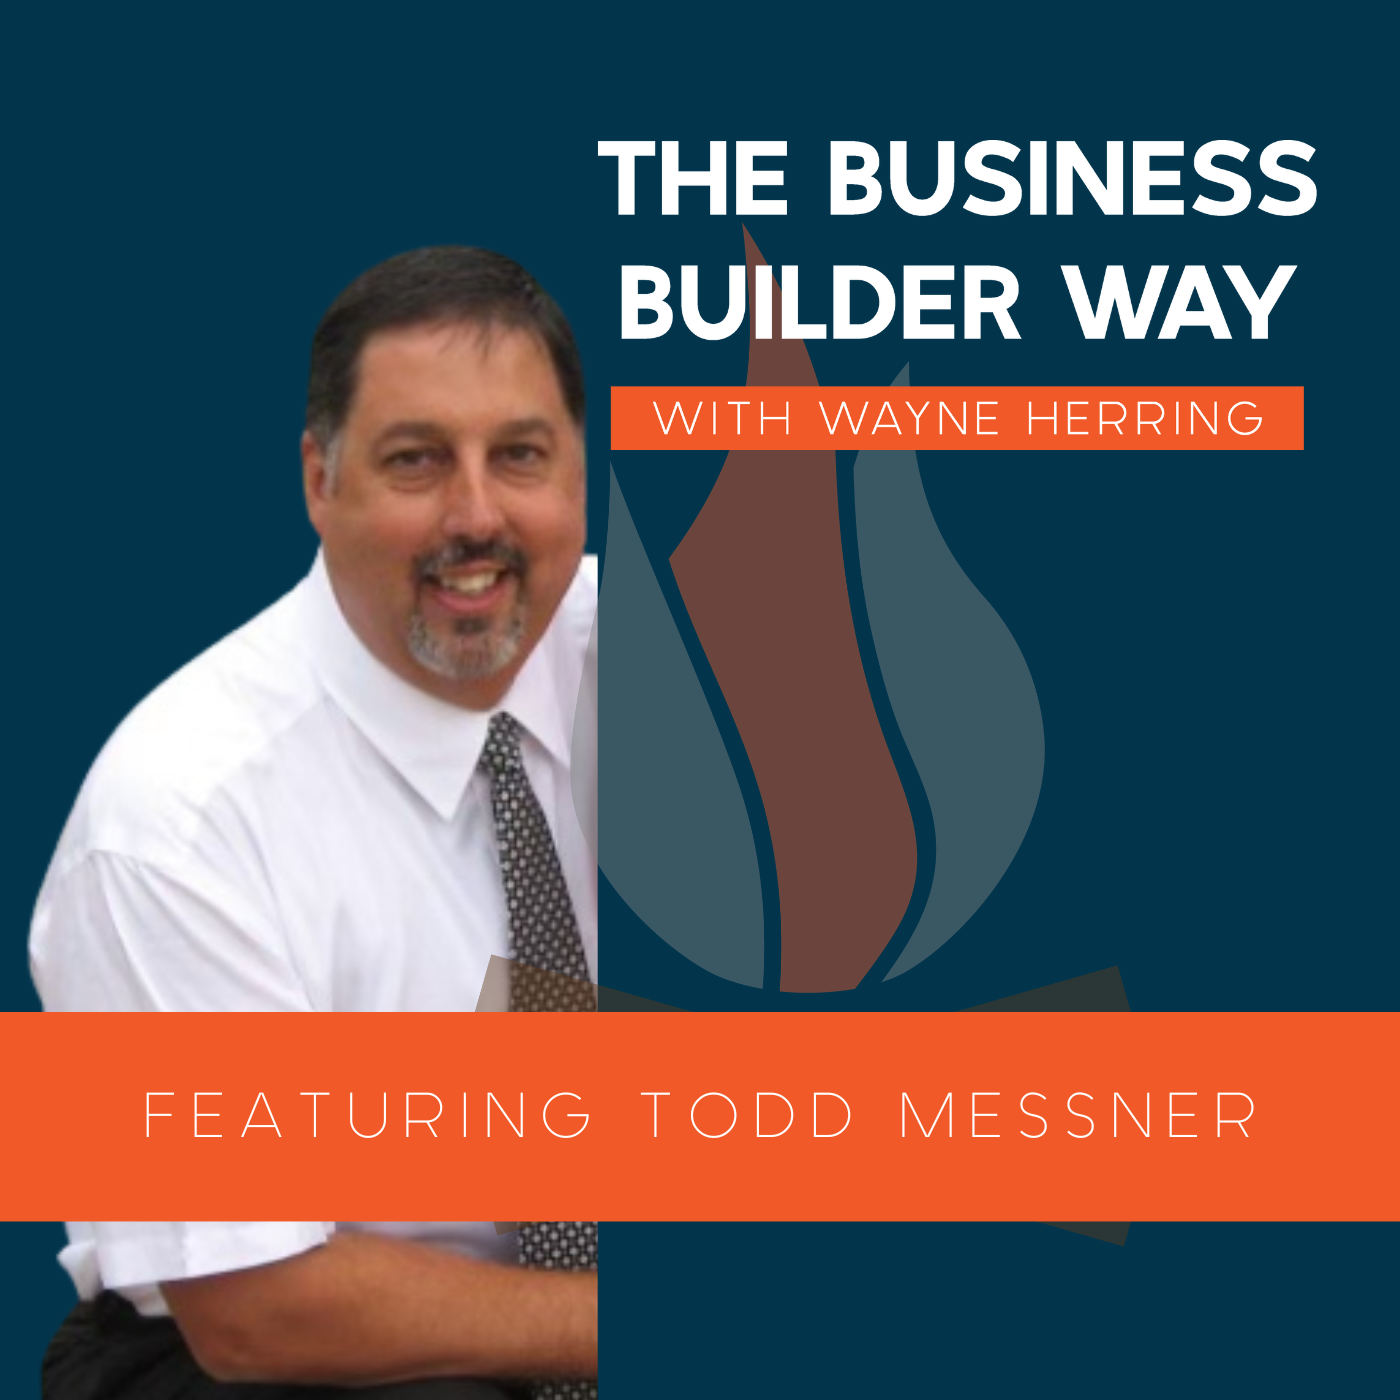 Business Builder Way Podcast image featuring Todd Messner.